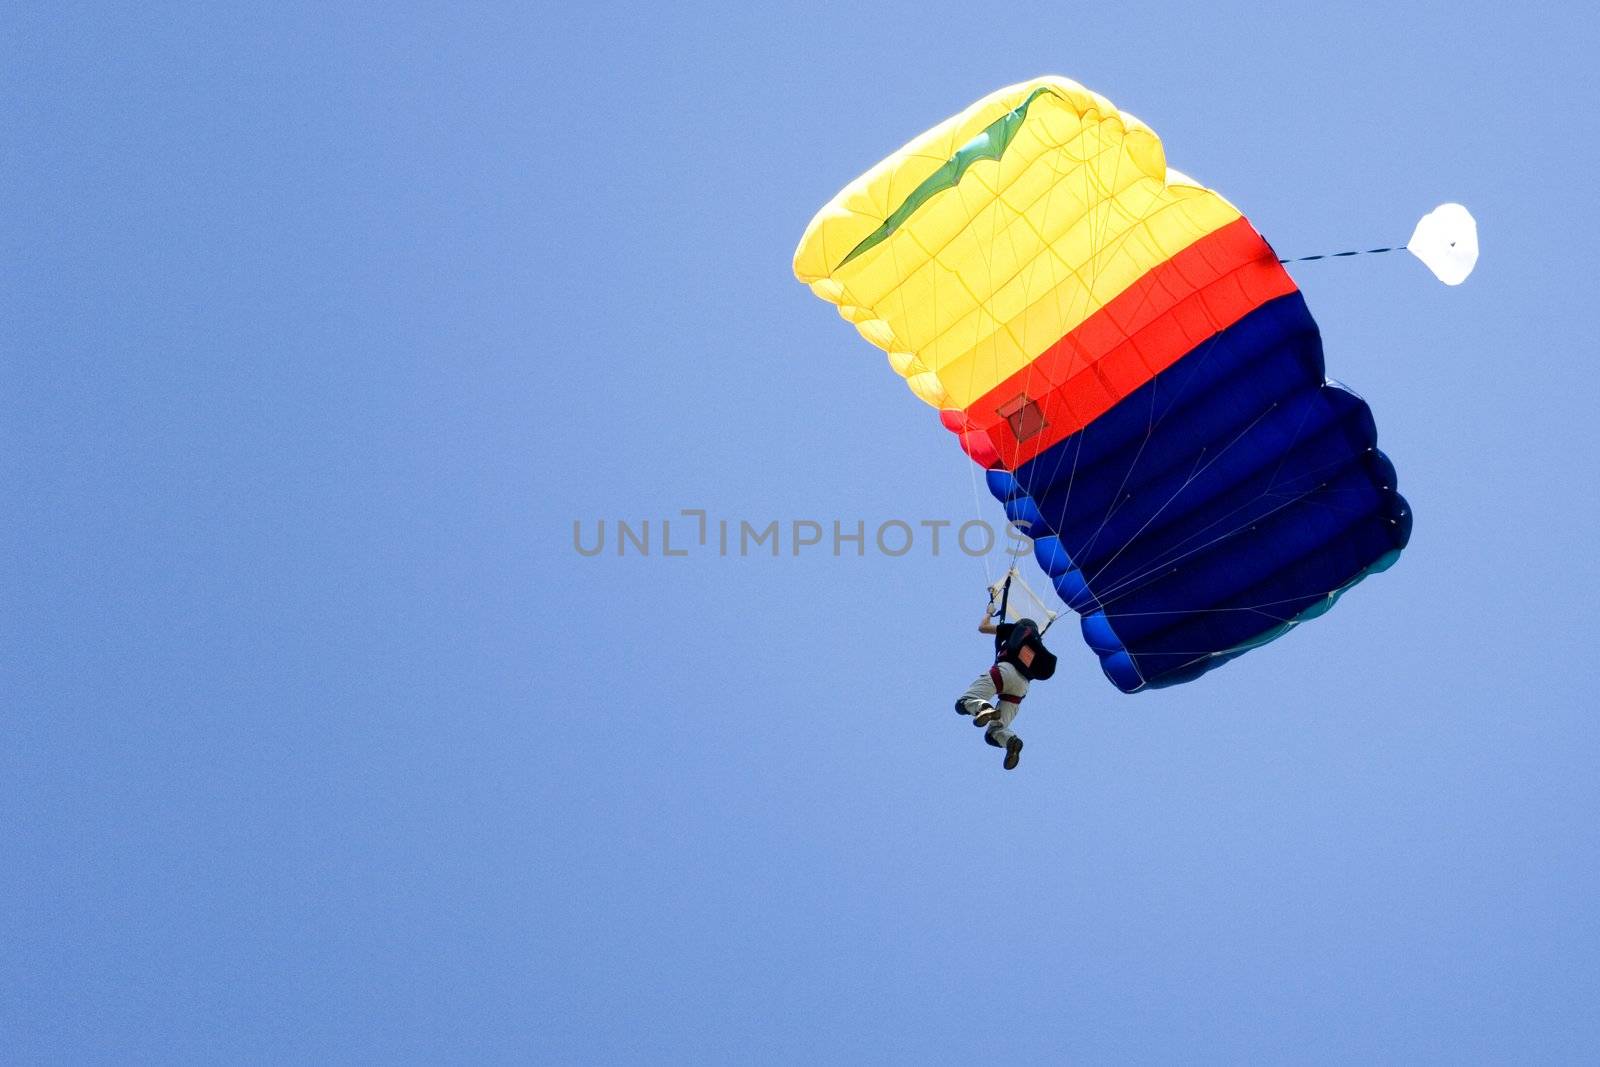 Image of a daring base jumper in action.